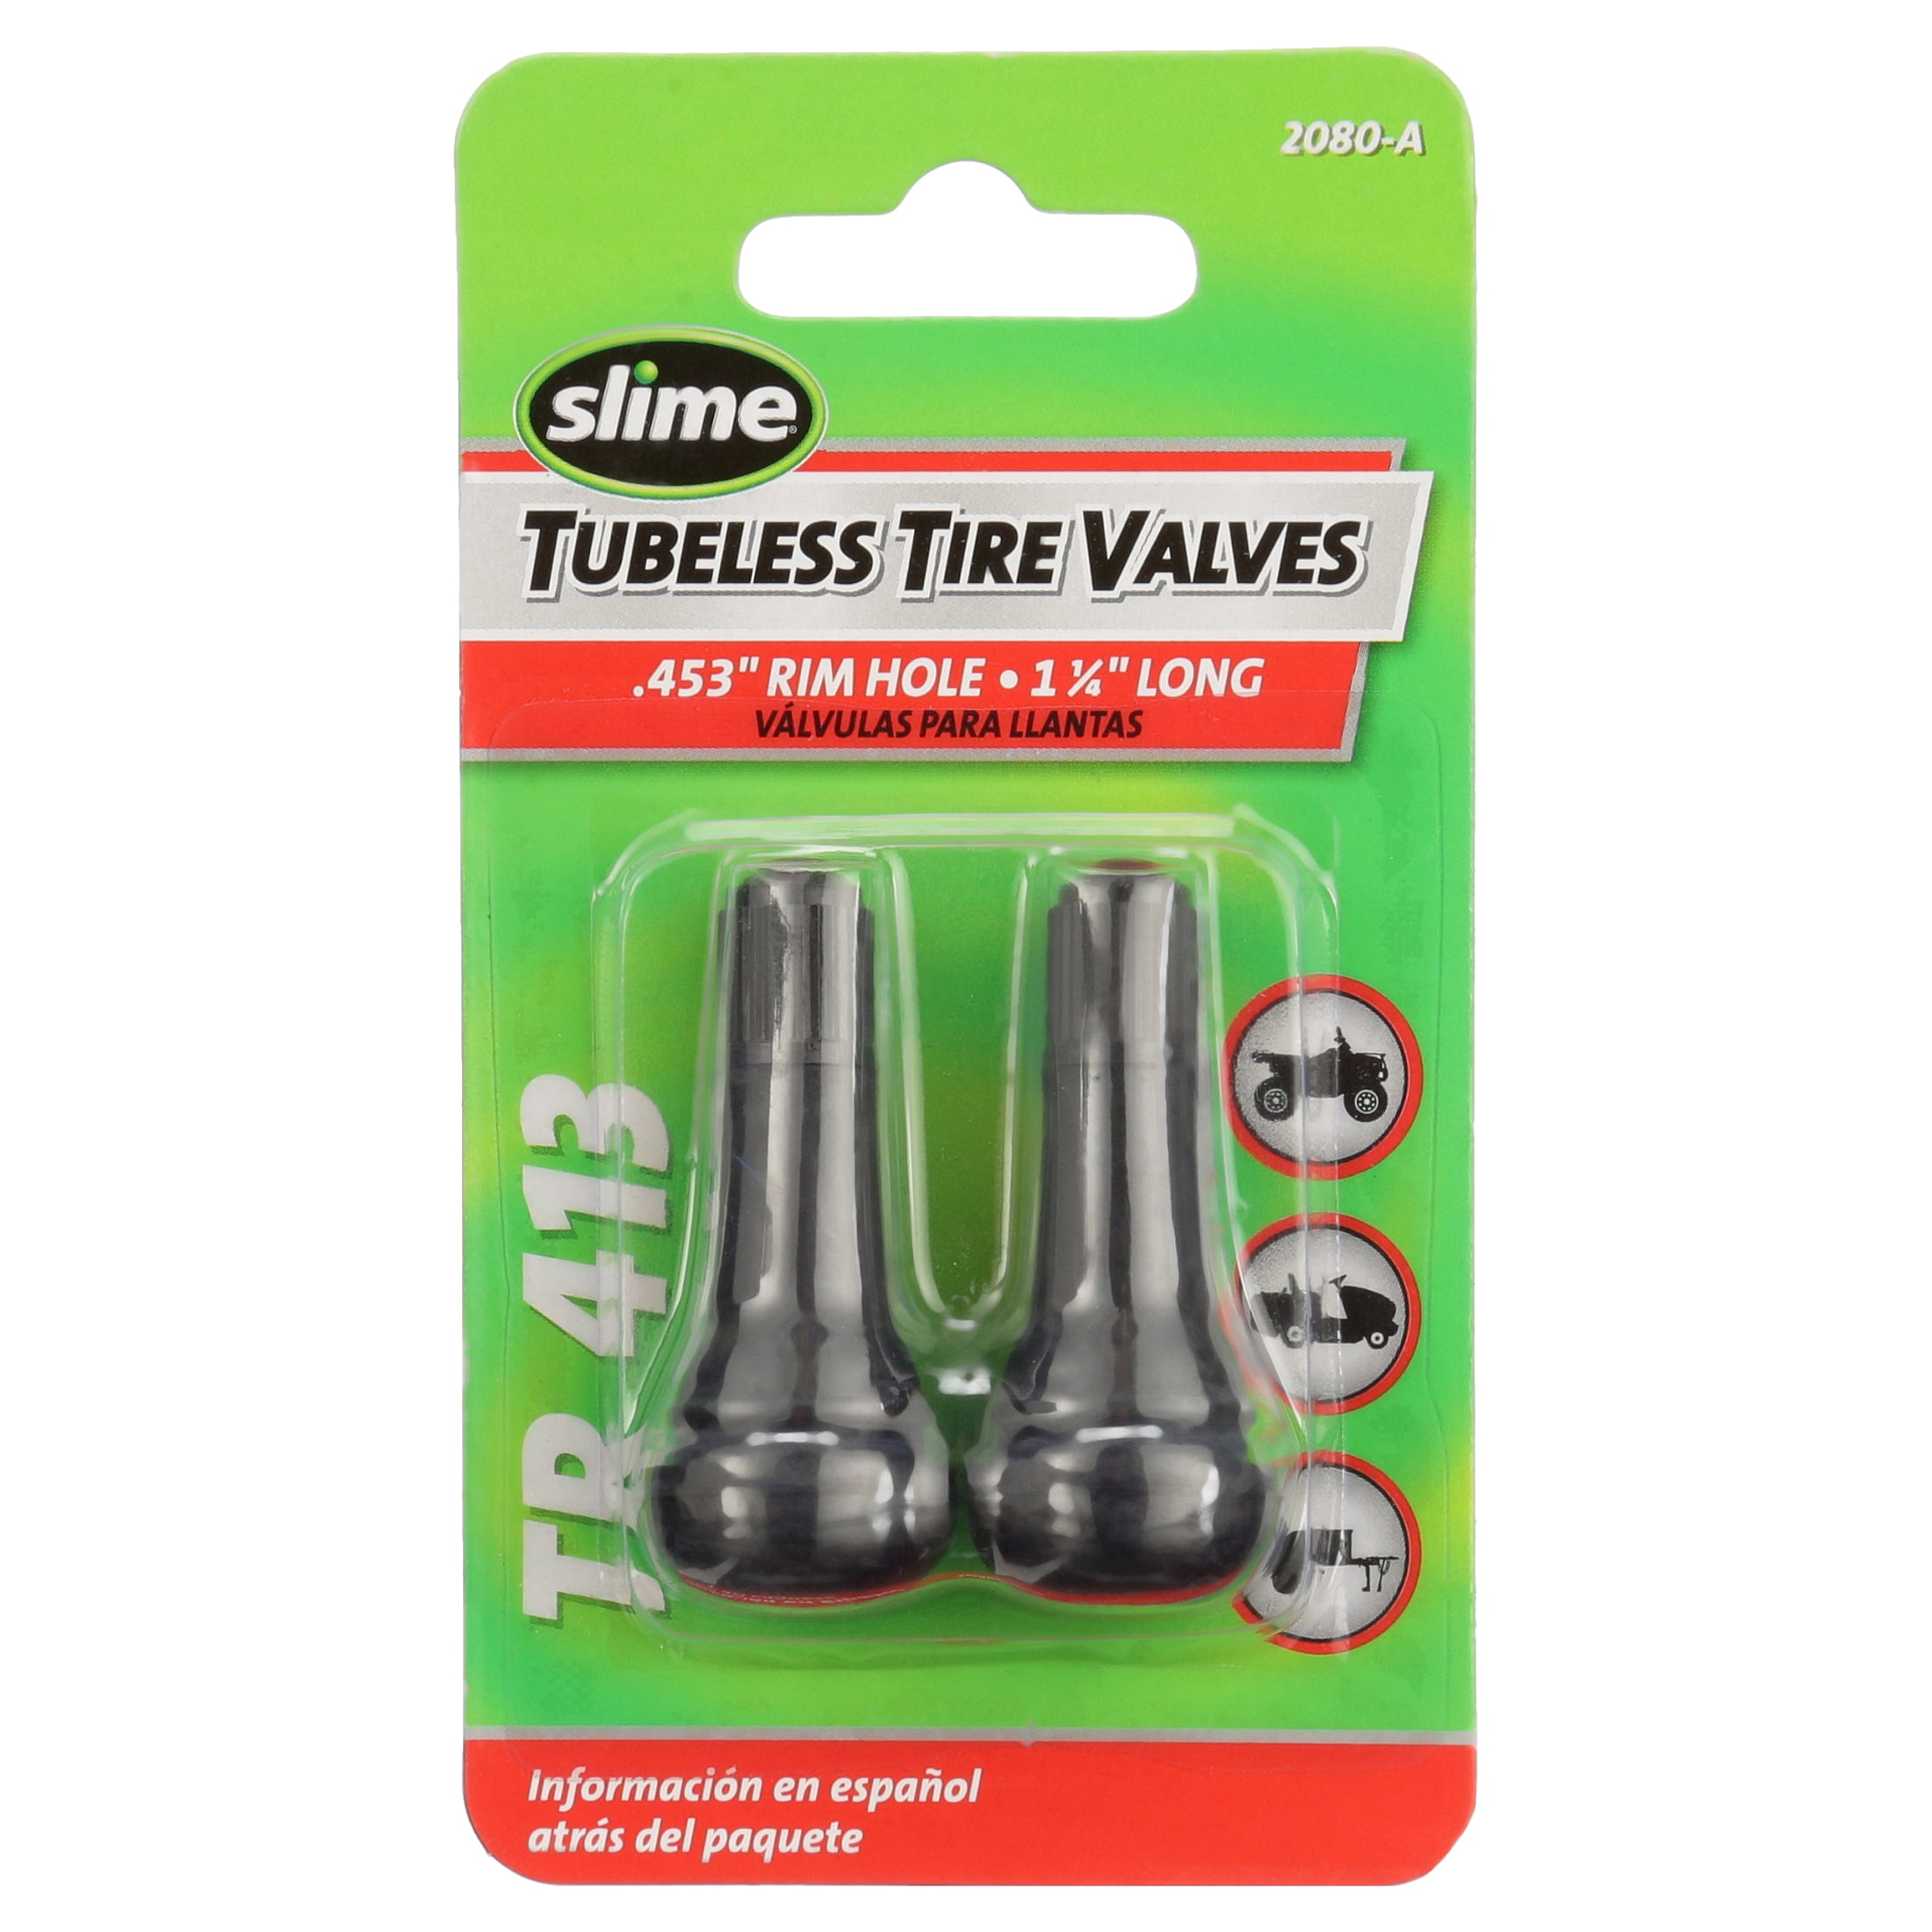 EPDM Rubber with Brass Stem WHEEL CONNECT Valve Stem TR413 Tubeless Tire Snap-in Valve Stems Pack of 4 Plus one Valve Core Remover 